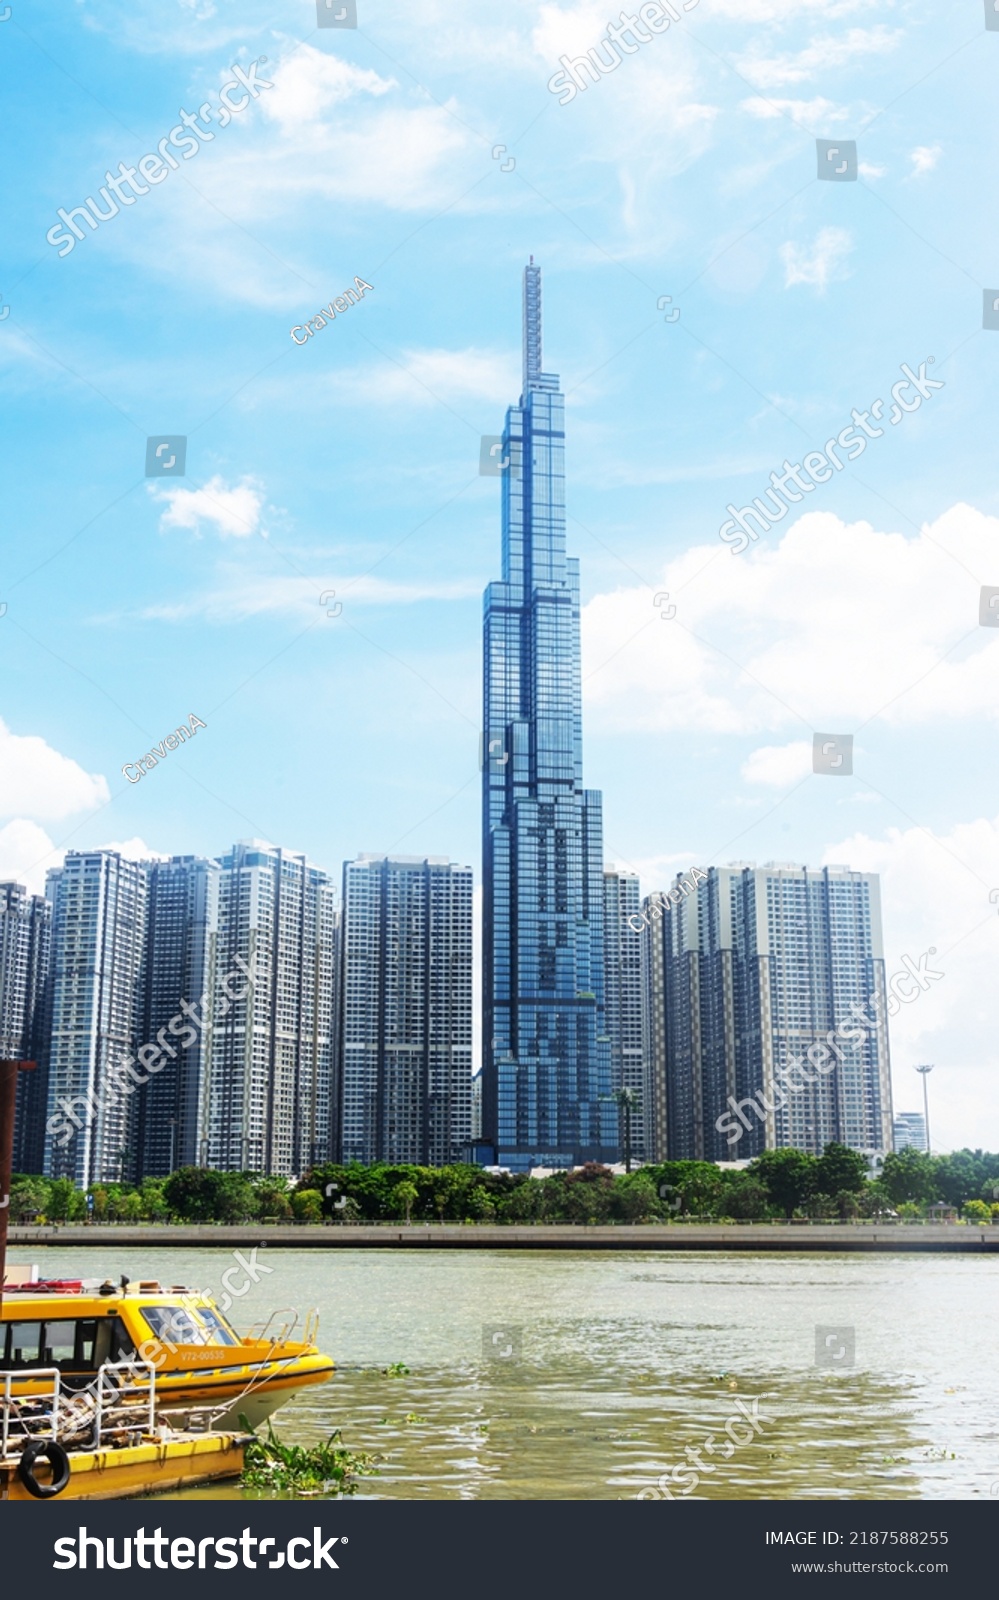 view of blue sky at Landmark 81 is a super tall skyscraper in center Ho Chi Minh City, Vietnam and Saigon bridge with development buildings, energy power infrastructure. Travel concept. #2187588255